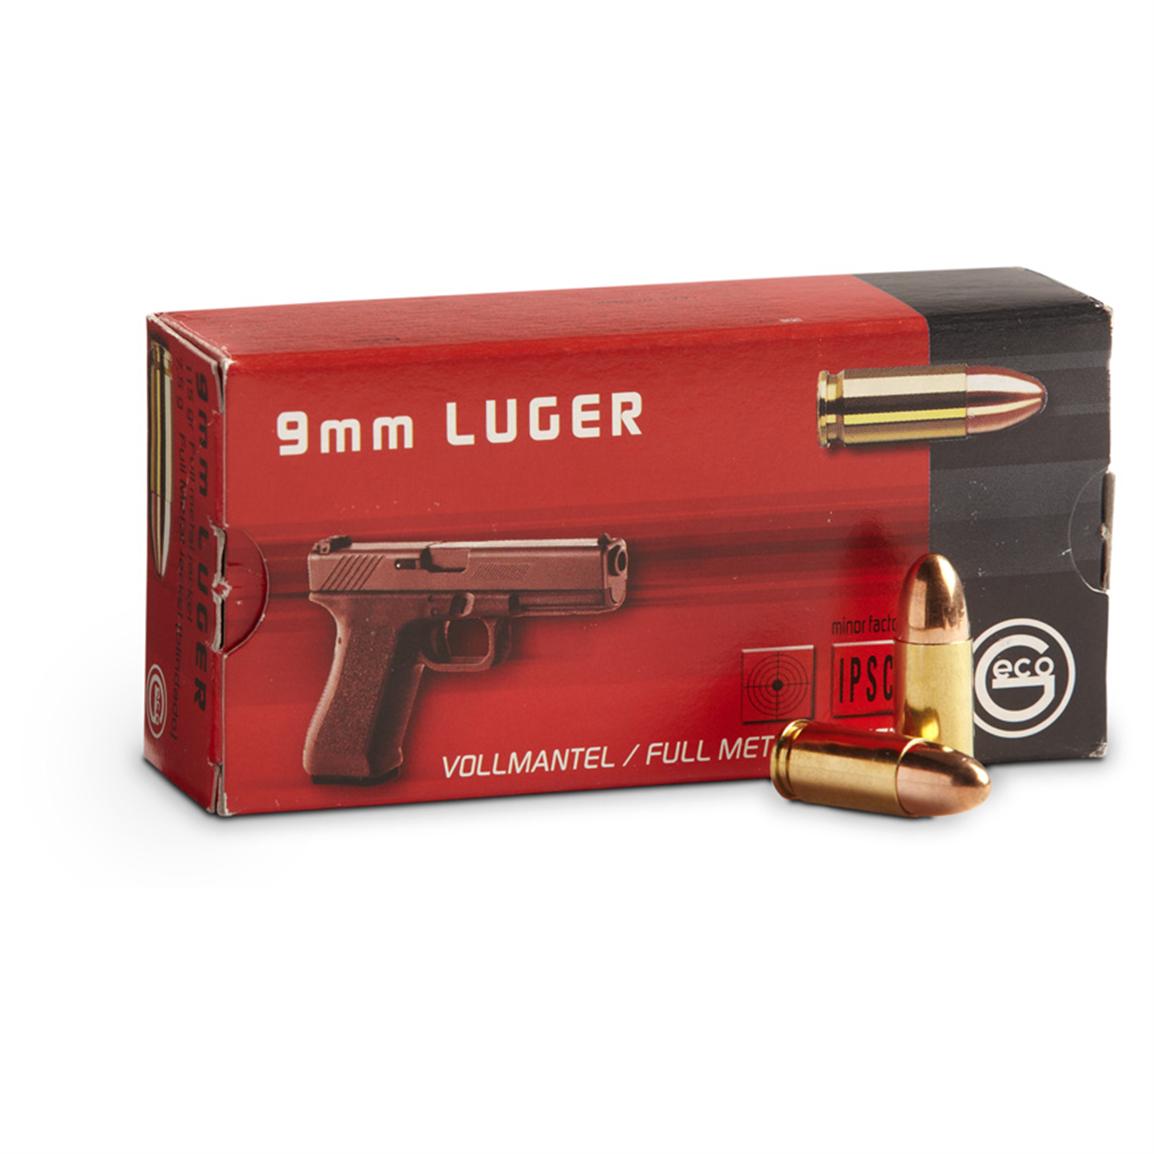 Geco 9mm Fmj 115 Grain 500 Rounds 233126 9mm Ammo At Sportsmans